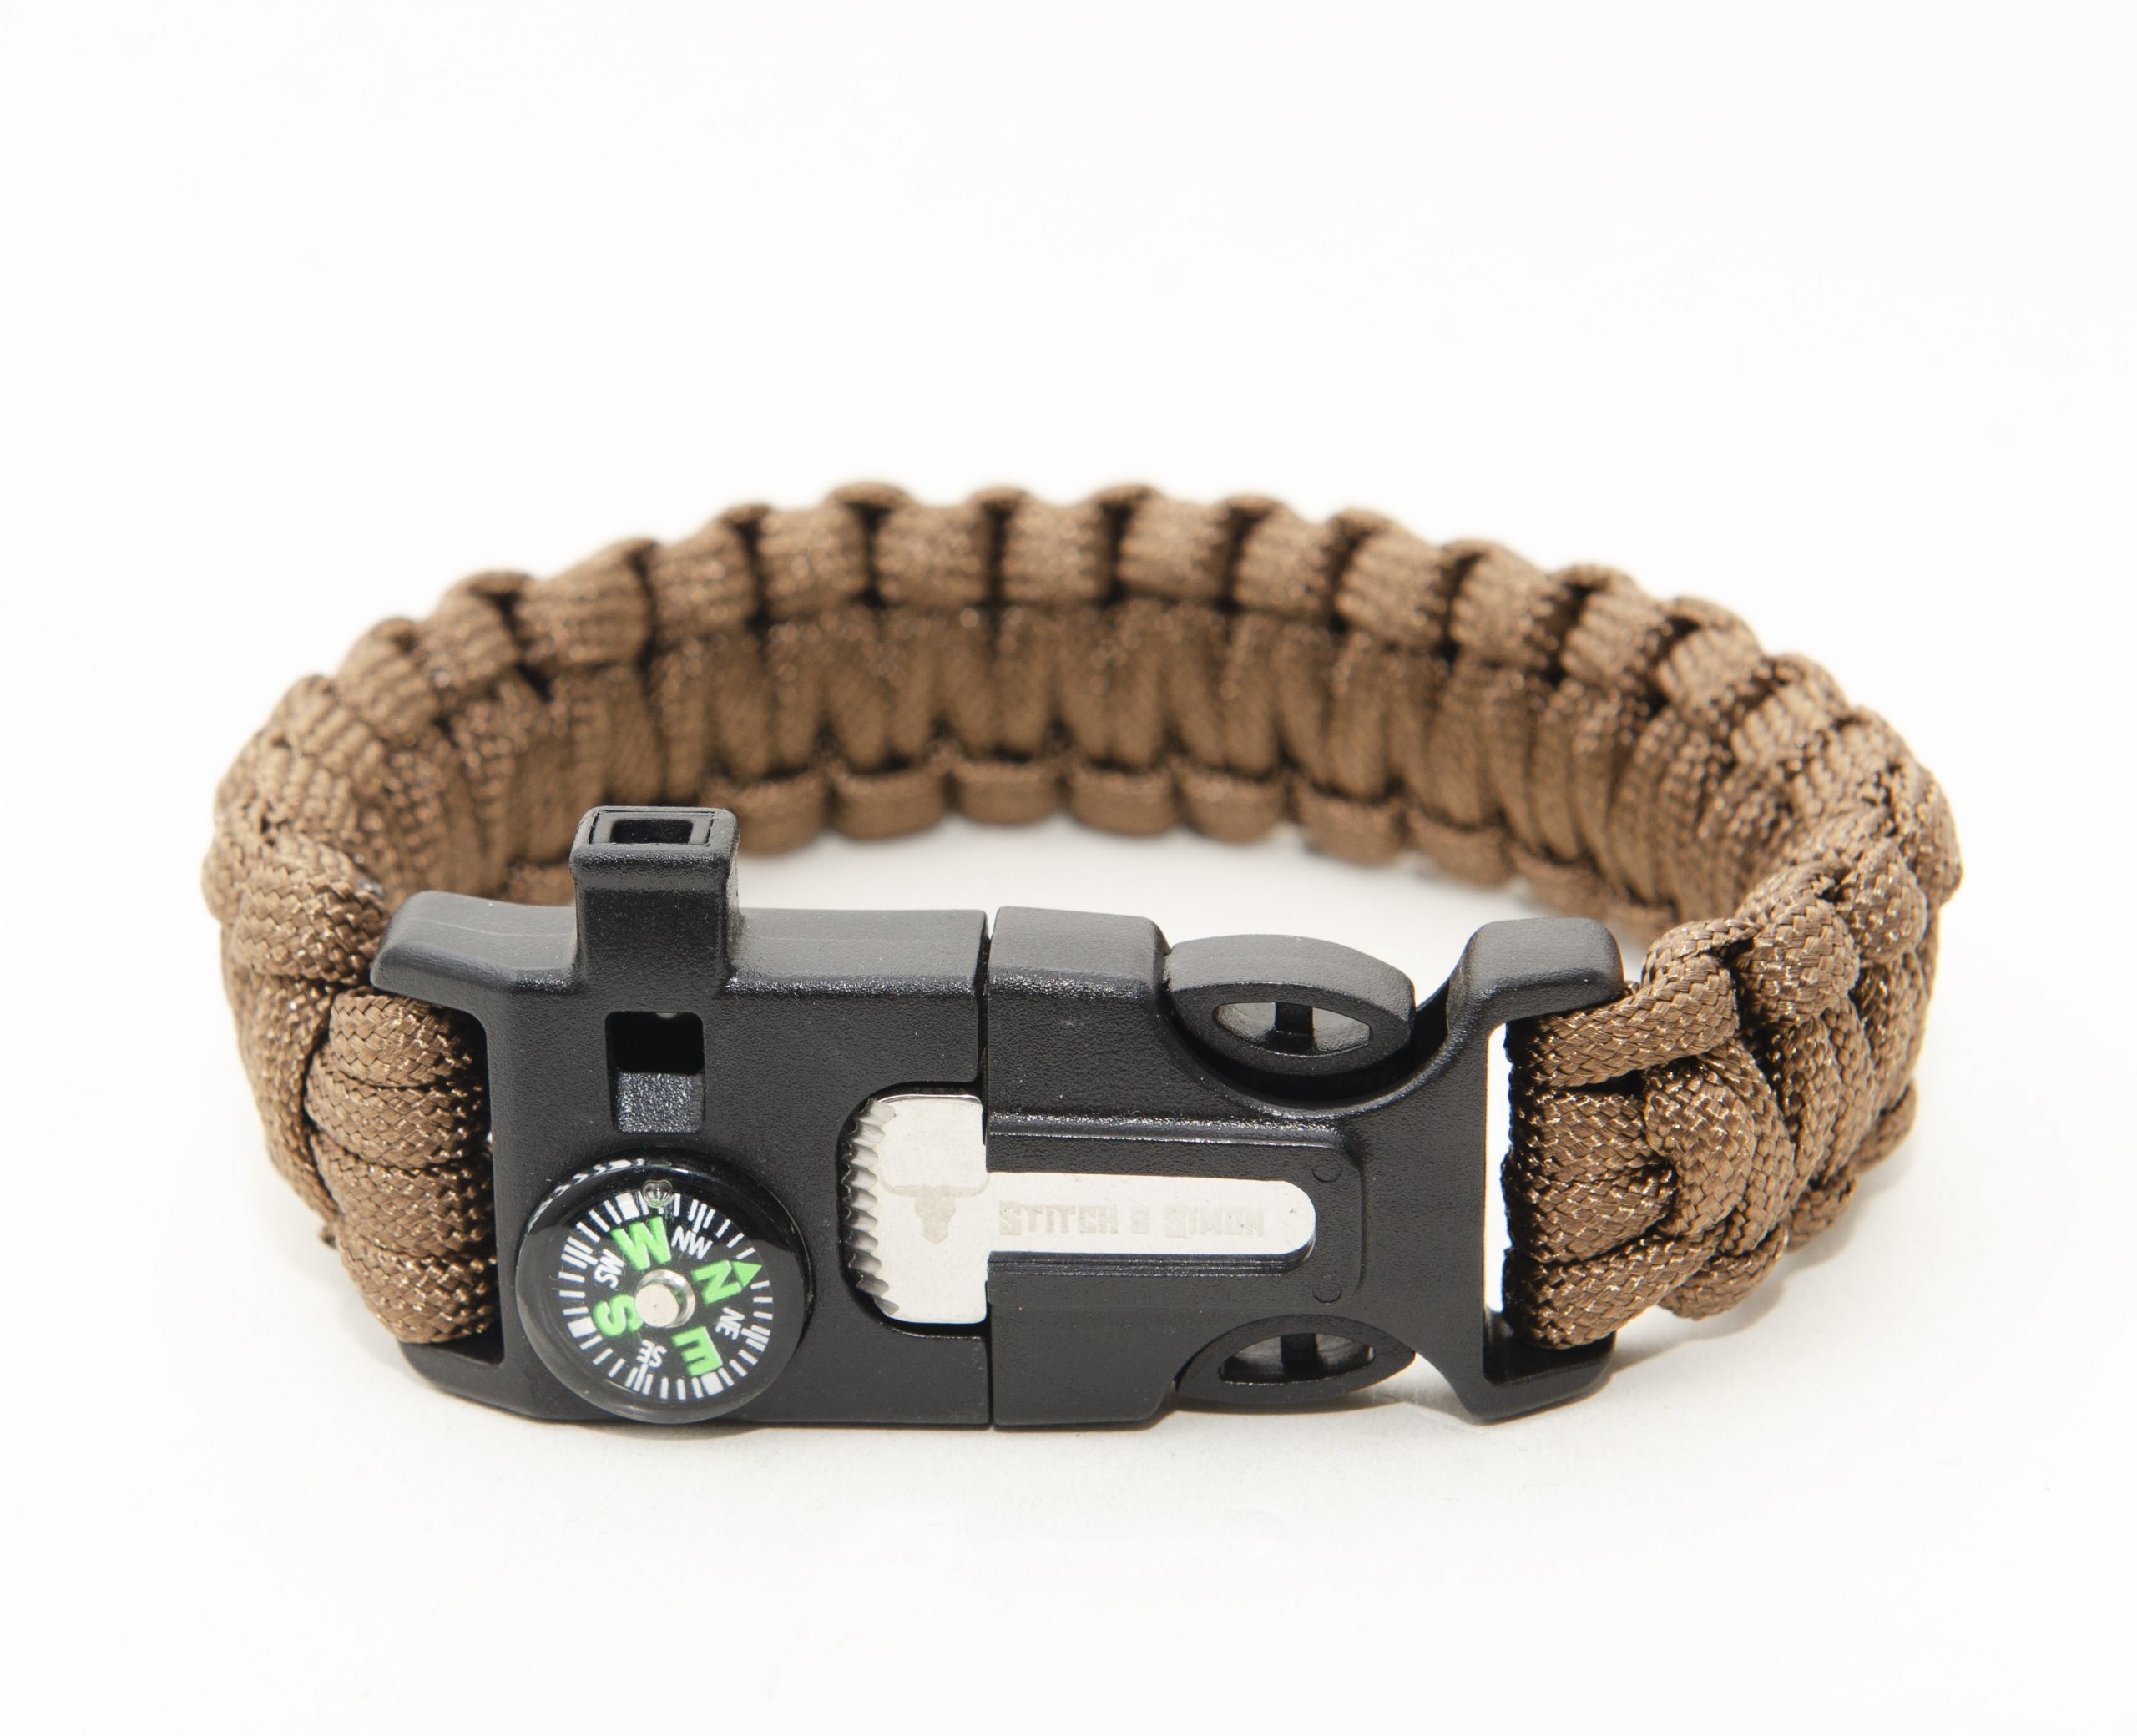 Paracord Bracelets for Hiking Gear,Essential Hiking Accessories for  Backpacking & Emergency Survival Kits,Compass, Rope, Whistle, Firestarter  (2Pcs) - Walmart.com